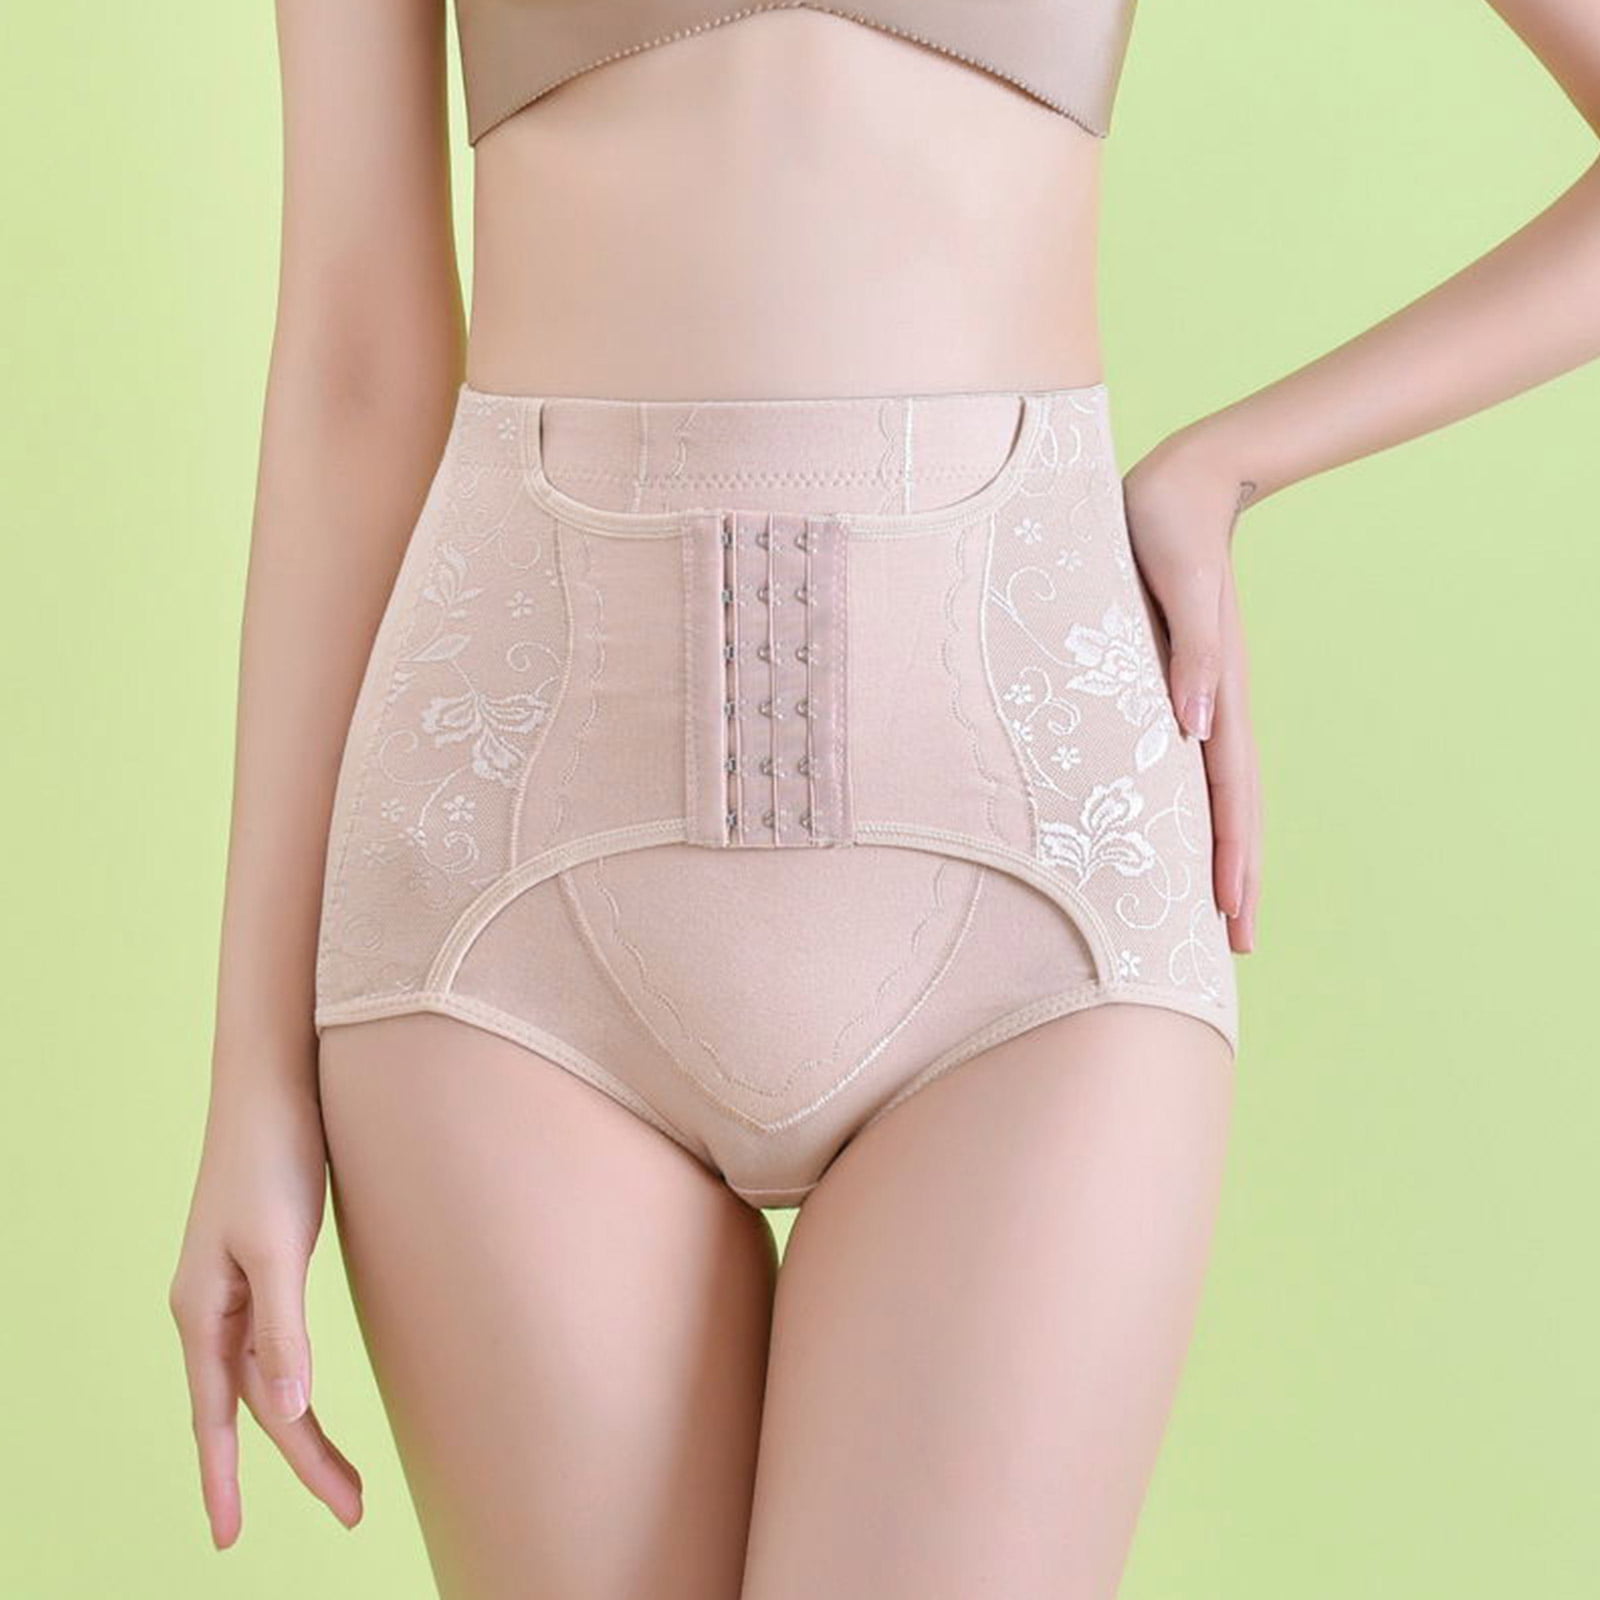 Golden Bra - 🔵 DERMAWEAR - Unique Women's Shapewear!🔵 🗨 MINI CORSET  ABDOMEN SHAPER - Gives a Curvy Centre to your Body Frame🗨 📢📢📢 DM for  Inquiries 📢📢📢 ✓Specially Designed , Blended